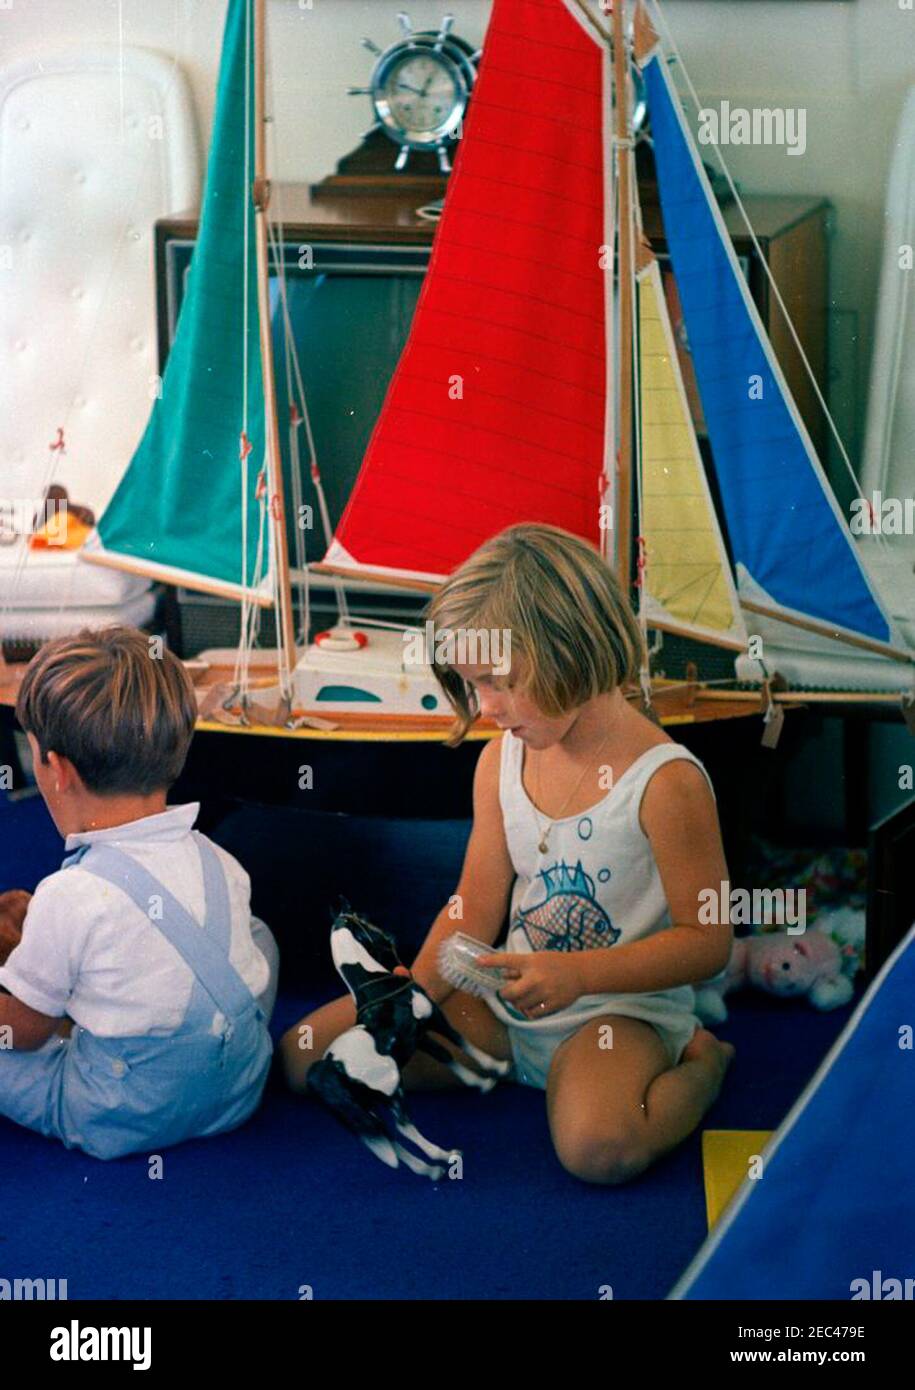 Labor Day weekend at Hyannis Port: Kennedy family and friends cruise aboard the Honey Fitz, 11:47AM. Caroline Kennedy and her cousin, Timothy Shriver, play with toys during Labor Day Weekend in Hyannis Port, Massachusetts. John F. Kennedy, Jr.u2019s toy boat, a gift from President Antonio Segni of Italy, sits in the background. Stock Photo